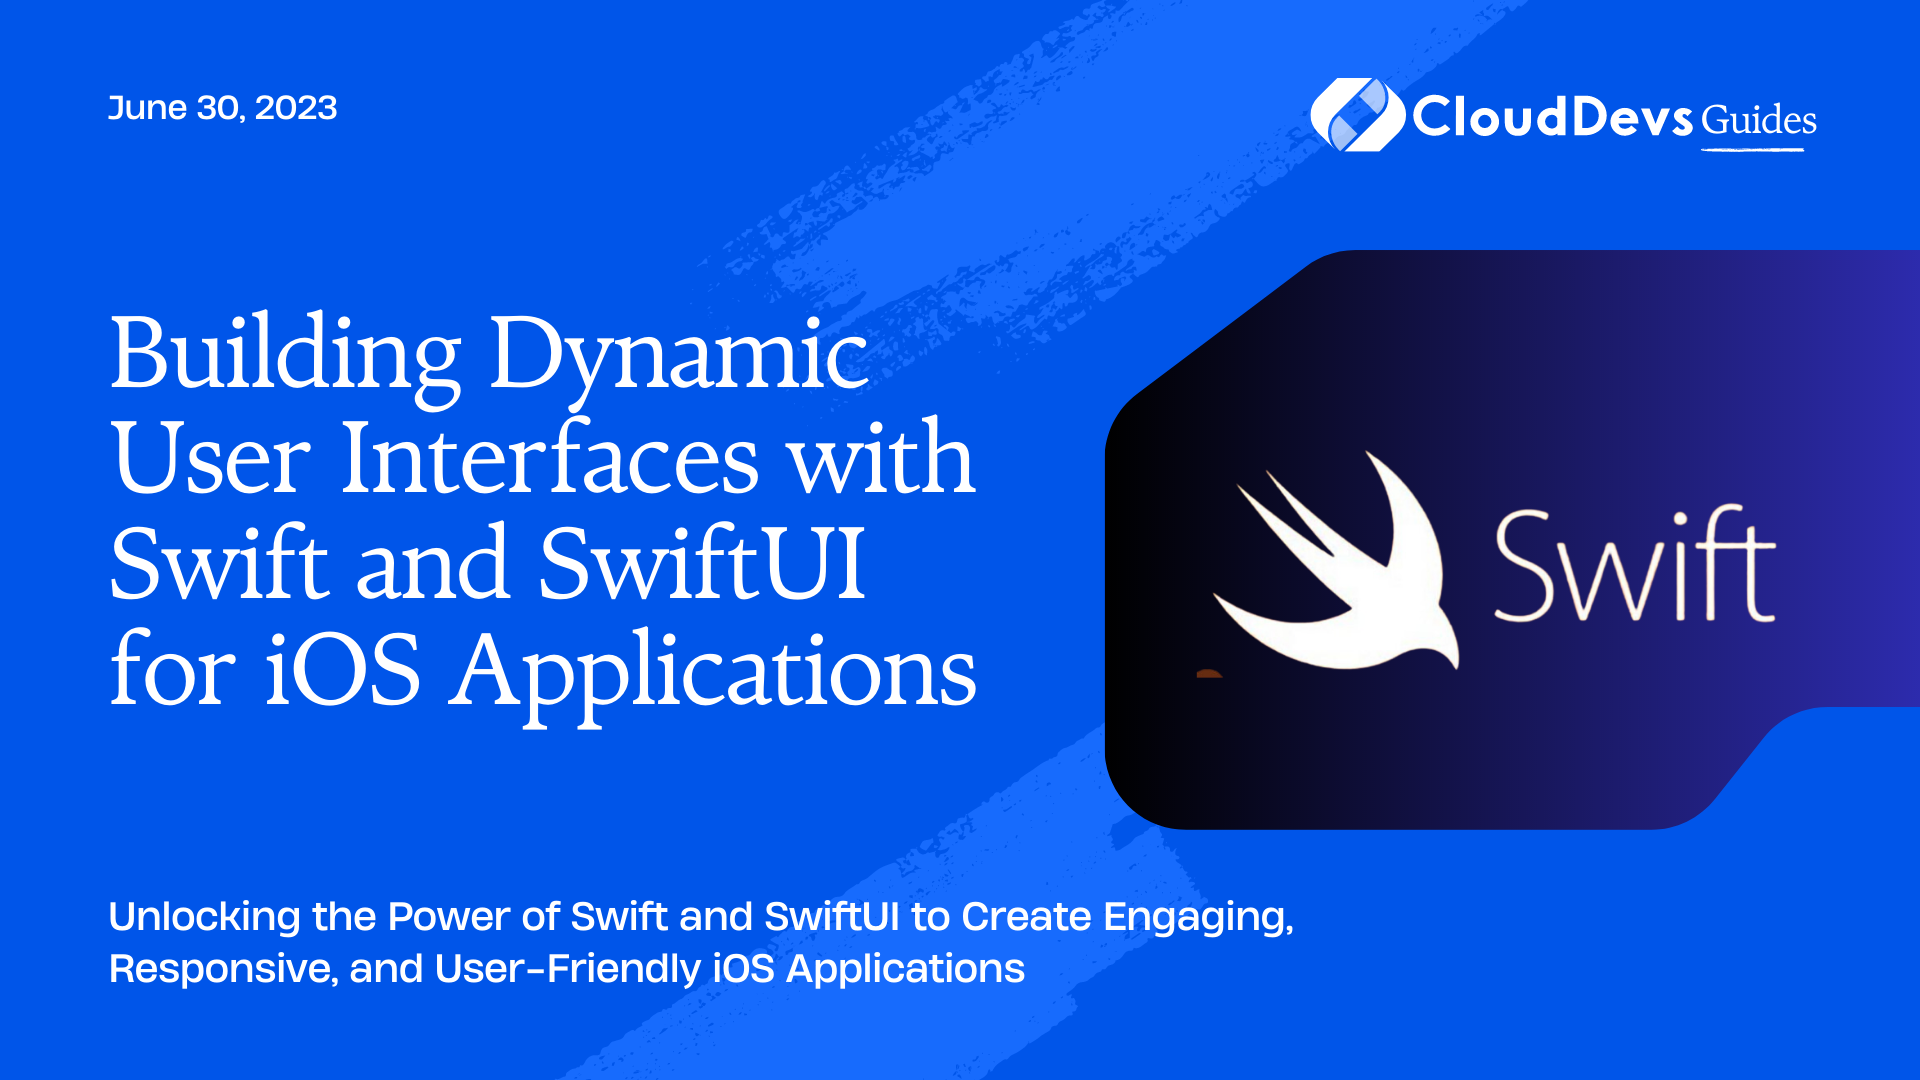 Building Dynamic User Interfaces with Swift and SwiftUI for iOS Applications